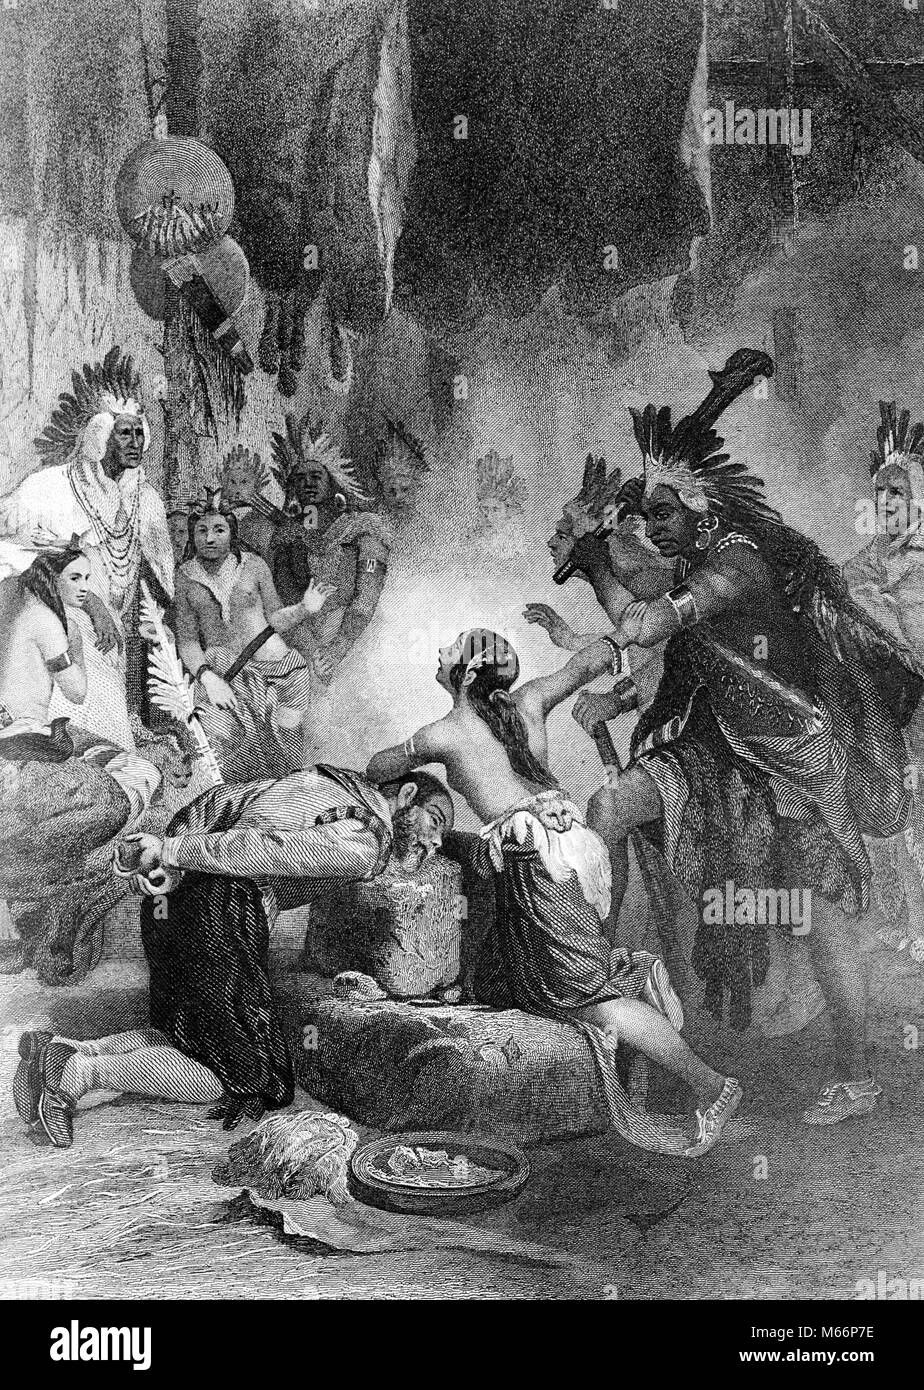 1600s POWHATAN AMERICAN INDIAN PRINCESS POCAHONTAS PLEADING TO RESCUE THE LIFE OF JOHN SMITH JAMESTOWN COLONY - q55084 CPC001 HARS COPY SPACE HALF-LENGTH ADOLESCENT INDIANS RISK TEENAGE GIRL INDOORS NOSTALGIA NORTH AMERICA 16-17 YEARS 25-30 YEARS 40-45 YEARS HISTORIC NORTH AMERICAN SAVE PERSONALITY ADVENTURE DANGEROUS PLEADING COURAGE EXCITEMENT FAMOUS LEADERSHIP COLONY ONE PERSON WITH OTHERS TEENAGED NATIVE AMERICAN SMITH 1600s JAMESTOWN JUVENILES MALES NATIVE AMERICANS B&W BLACK AND WHITE CANGER CAUCASIAN ETHNICITY FAMOUS PERSON INDIGENOUS OLD FASHIONED PERSONS POCAHONTAS POWHATAN PRINCESS Stock Photo